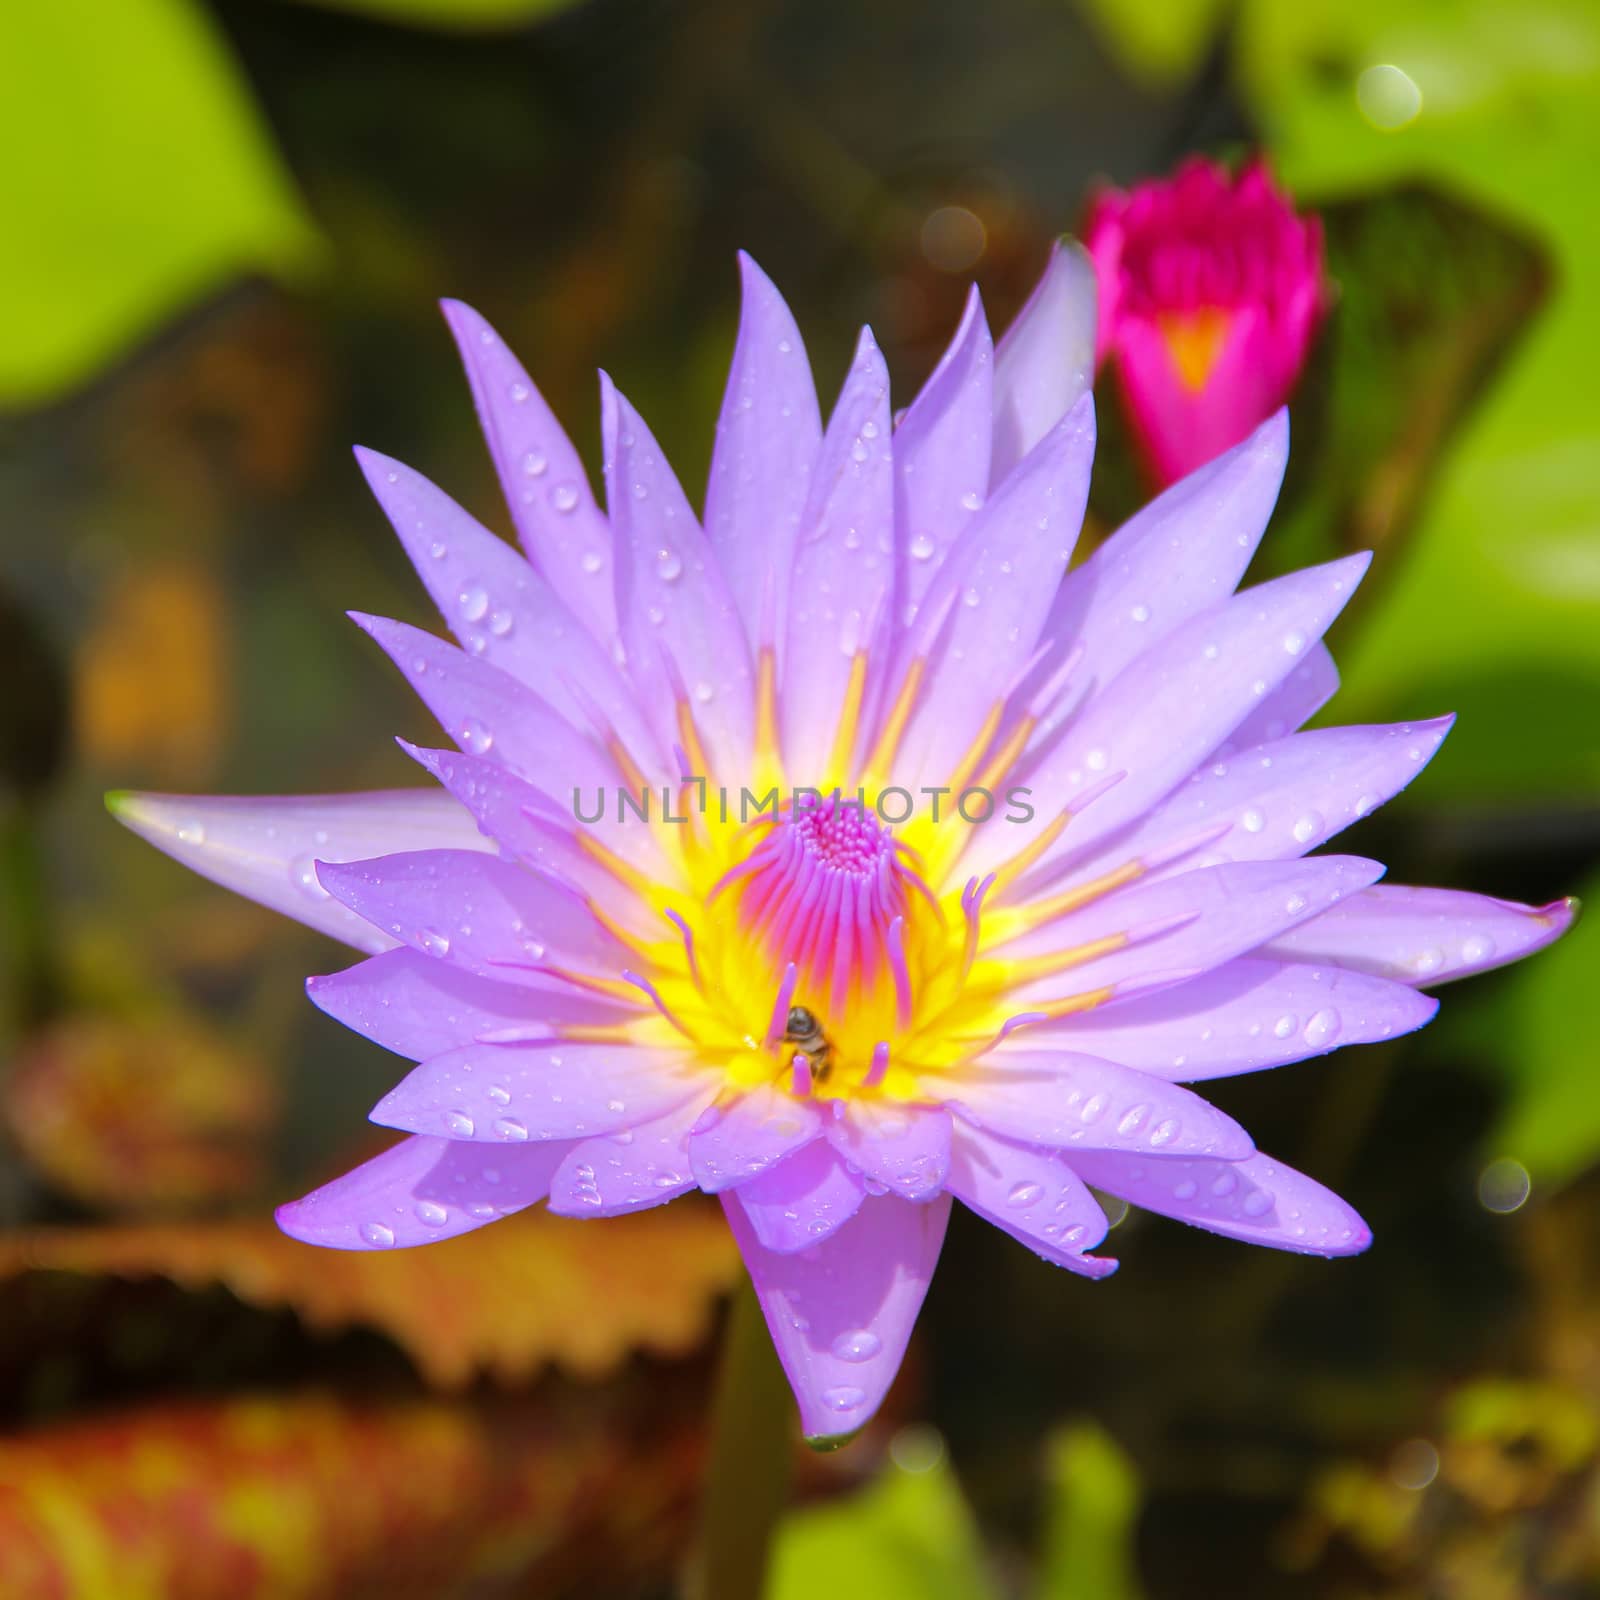 Lotus blossom or water lily flowers blooming